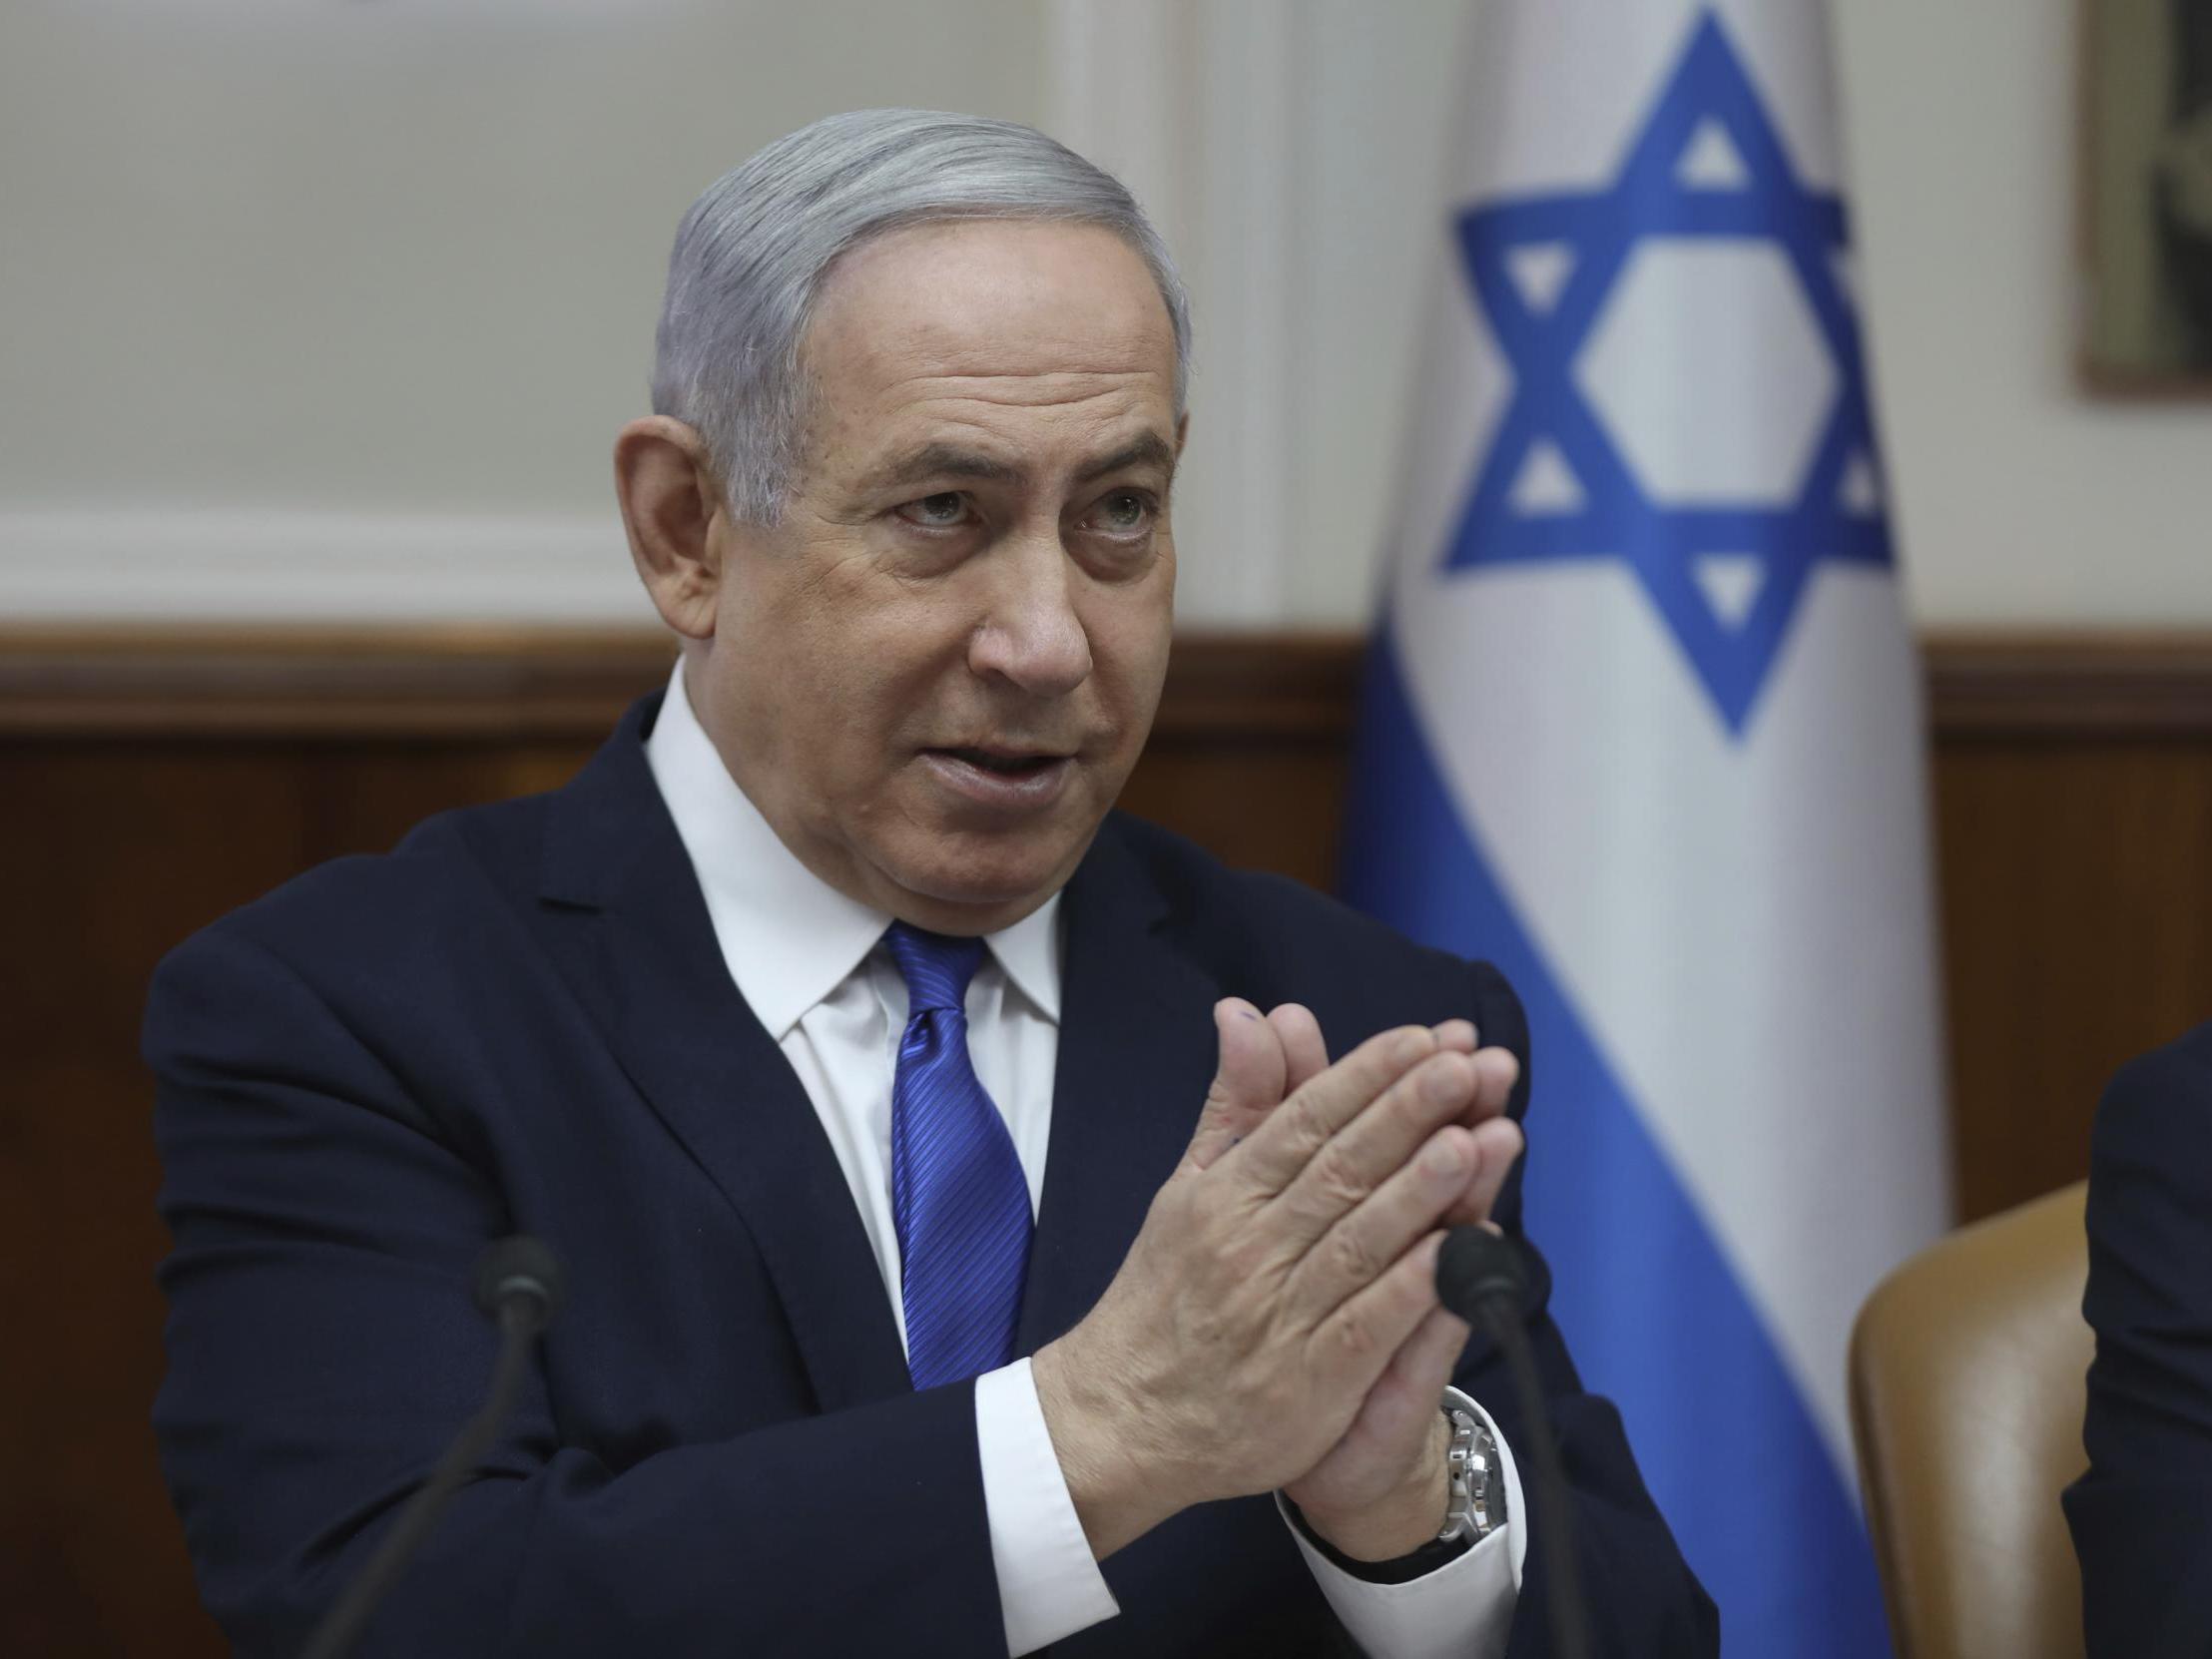 Benjamin Netanyahu has been indicted by Israel's attorney general on charges of bribery, fraud and breach of trust